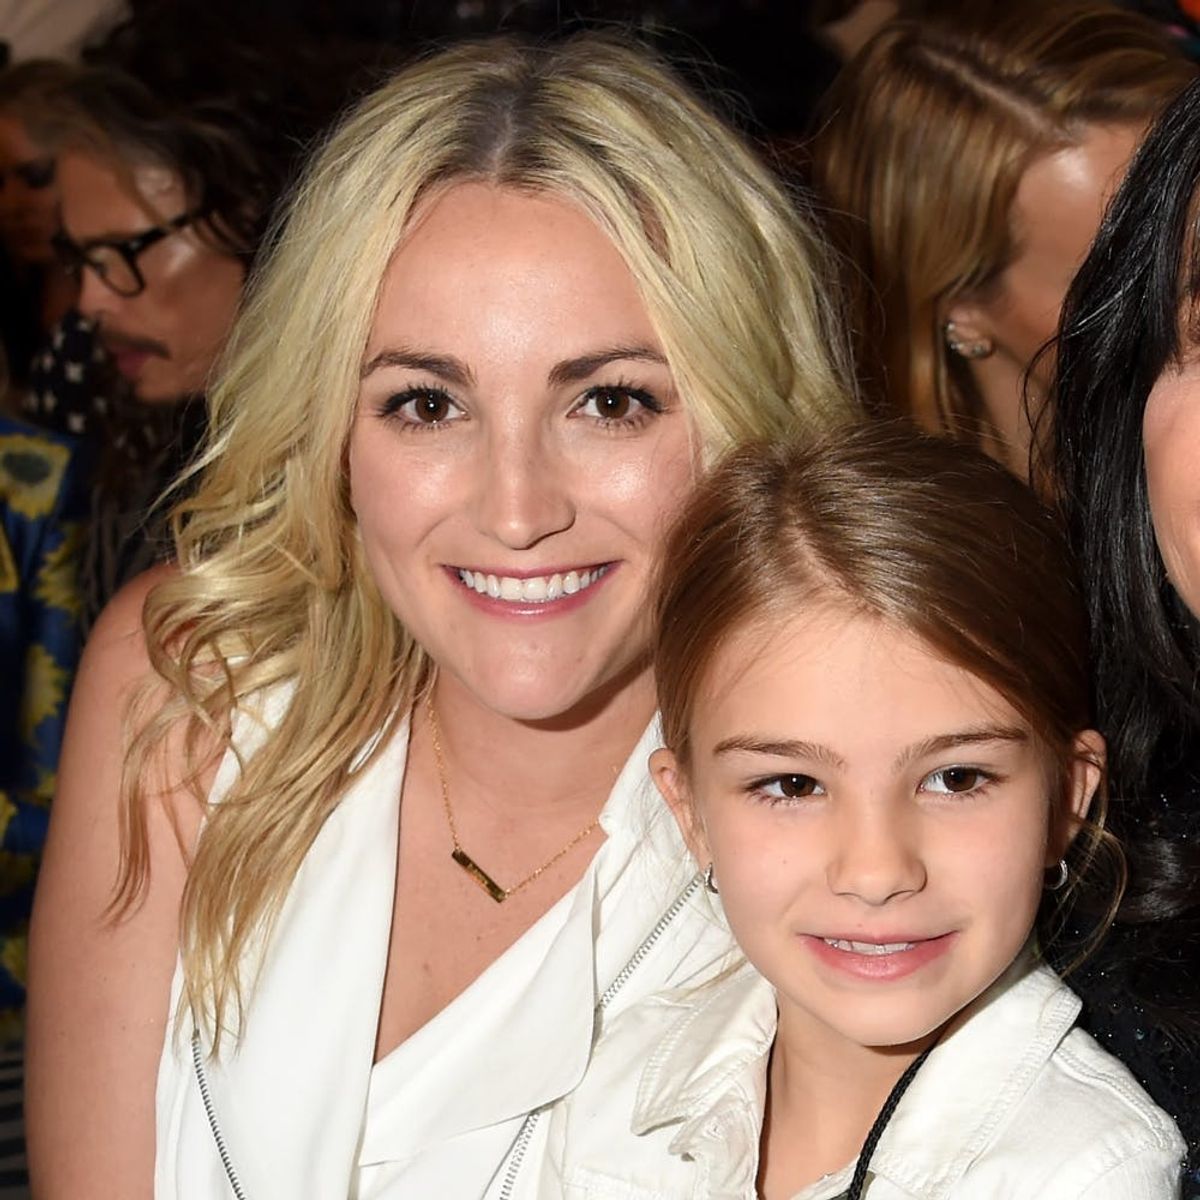 The New Details About Jamie Lynn Spears’ Daughter’s ATV Accident Are Heartbreaking